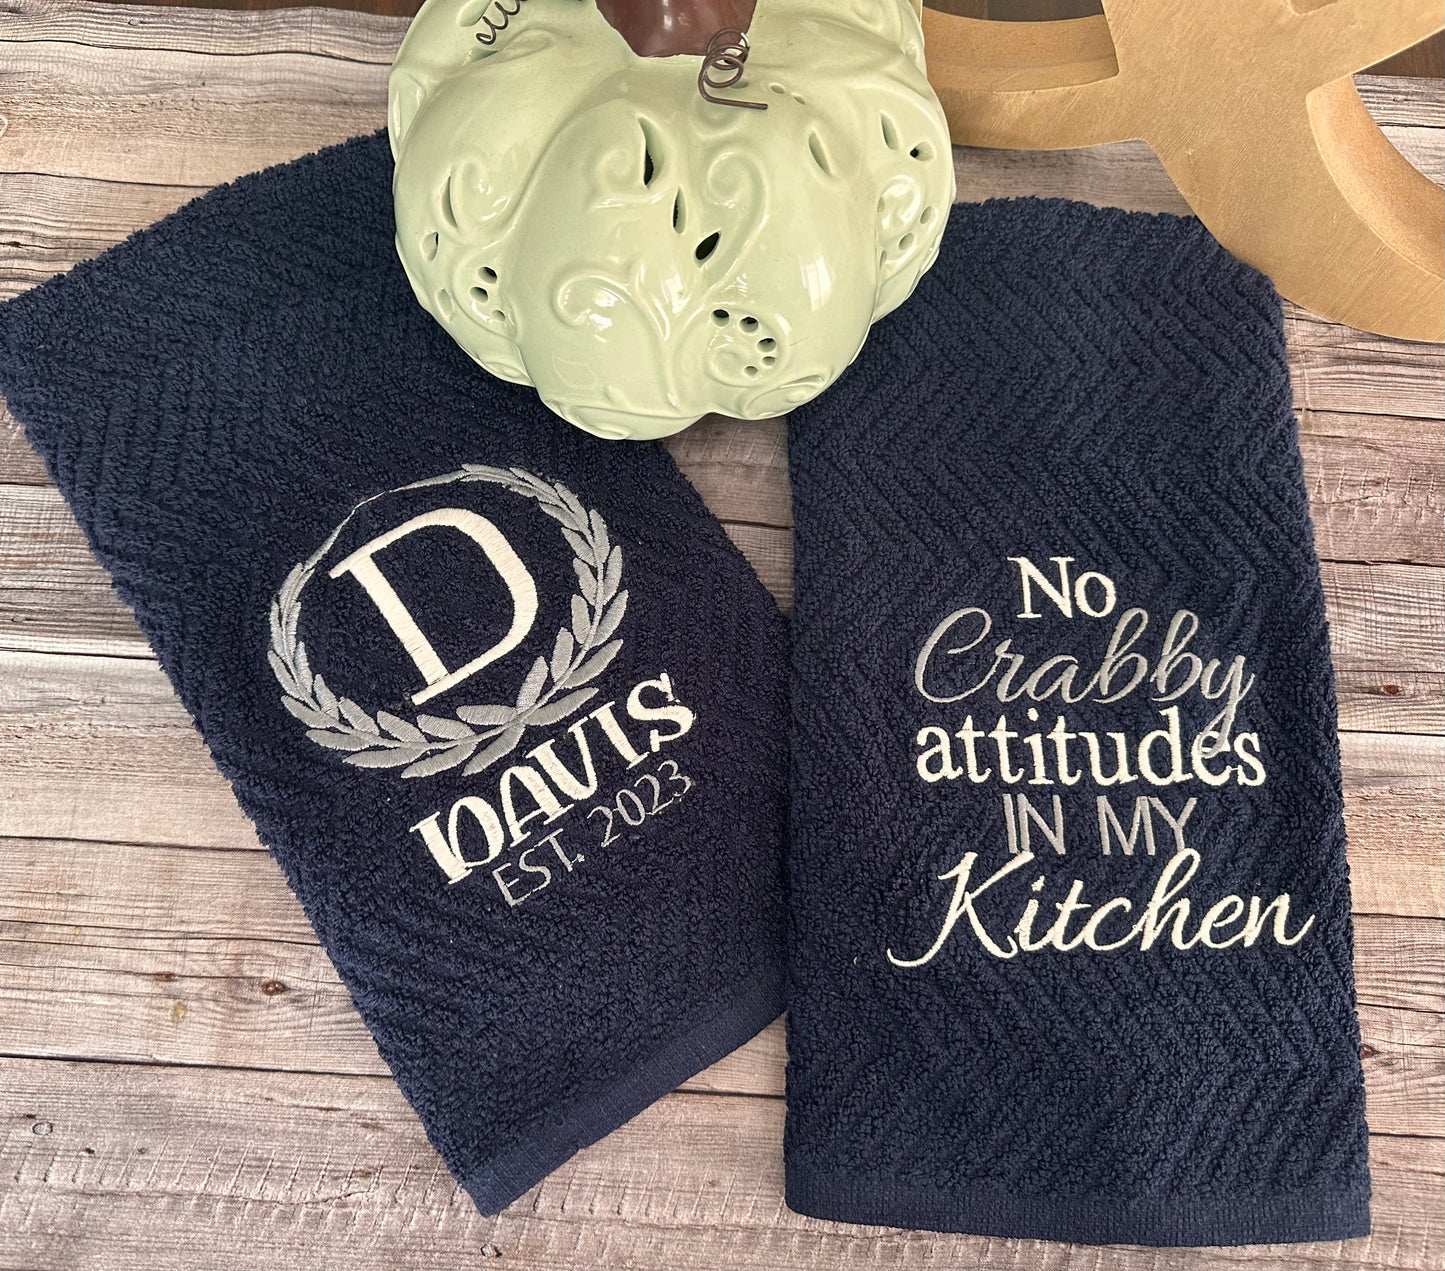 Personalized kitchen towels